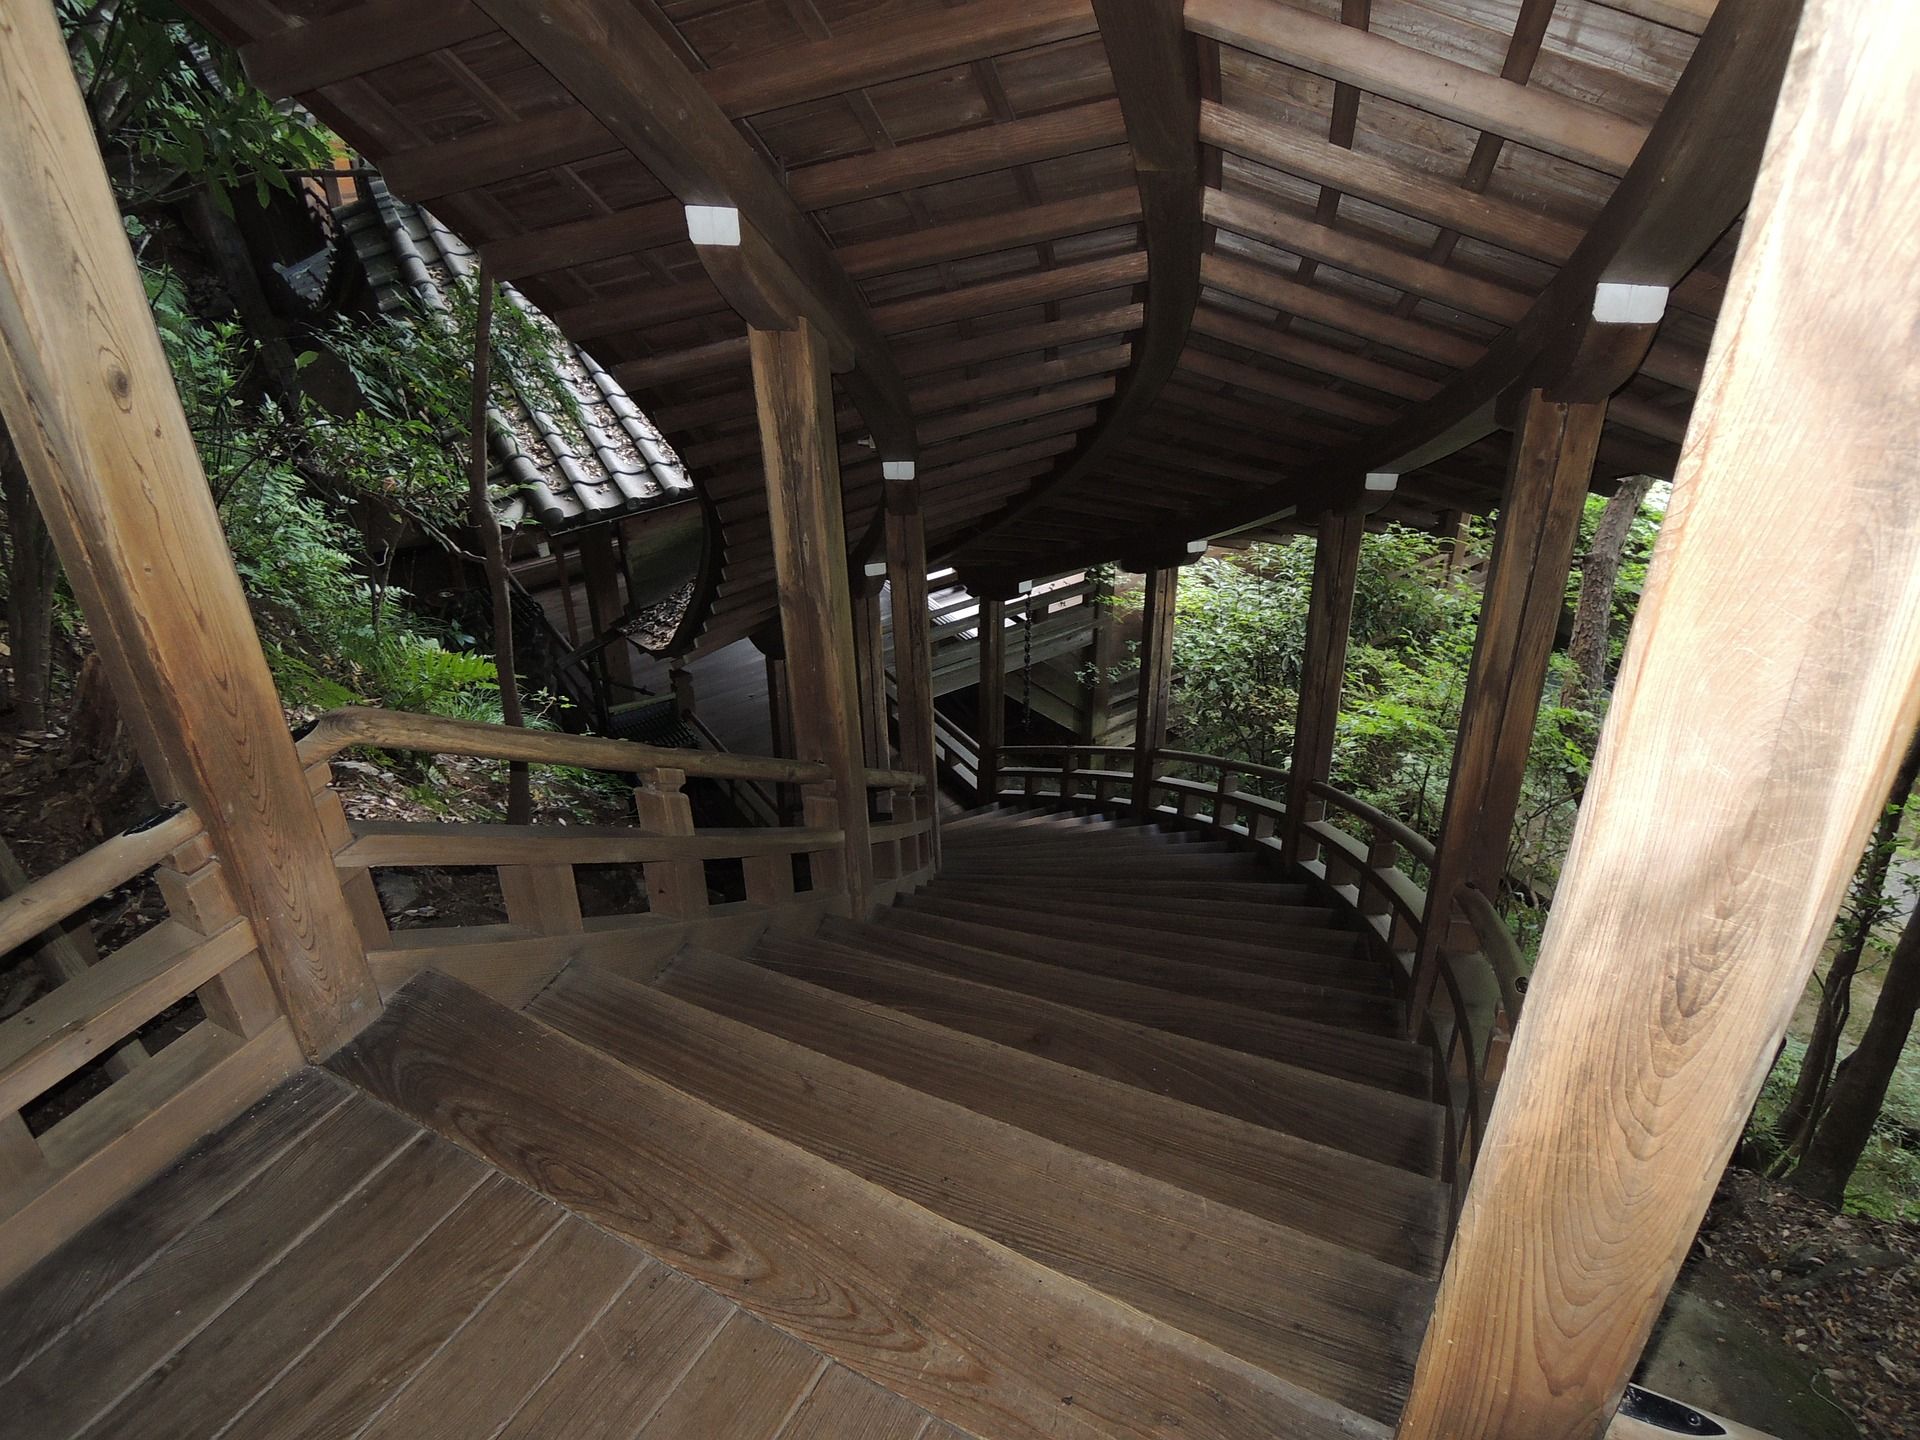 Wooden stairs spiraling down at the Eikando Temple in Kyoto, Japan